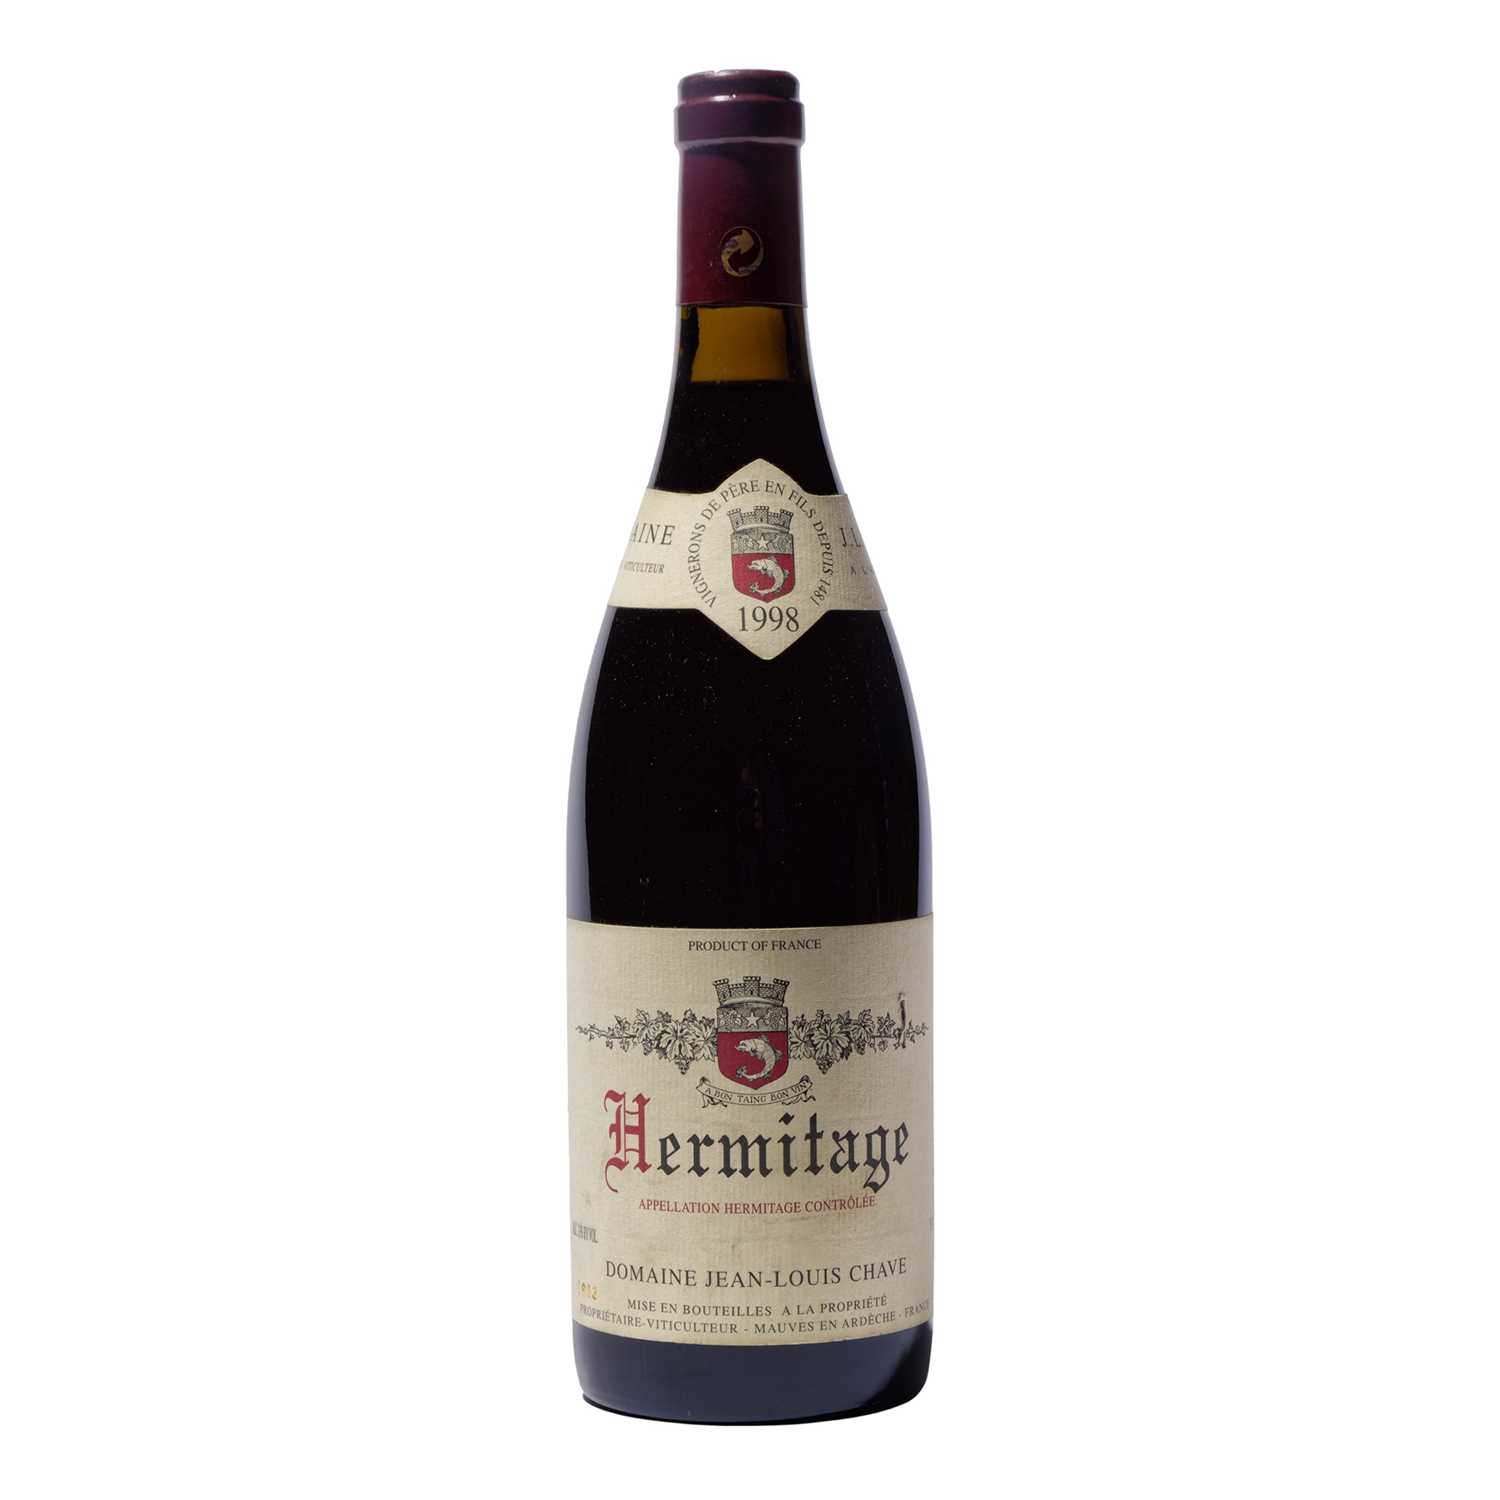 Lot 260 - 1 bottle 1998 Hermitage Chave